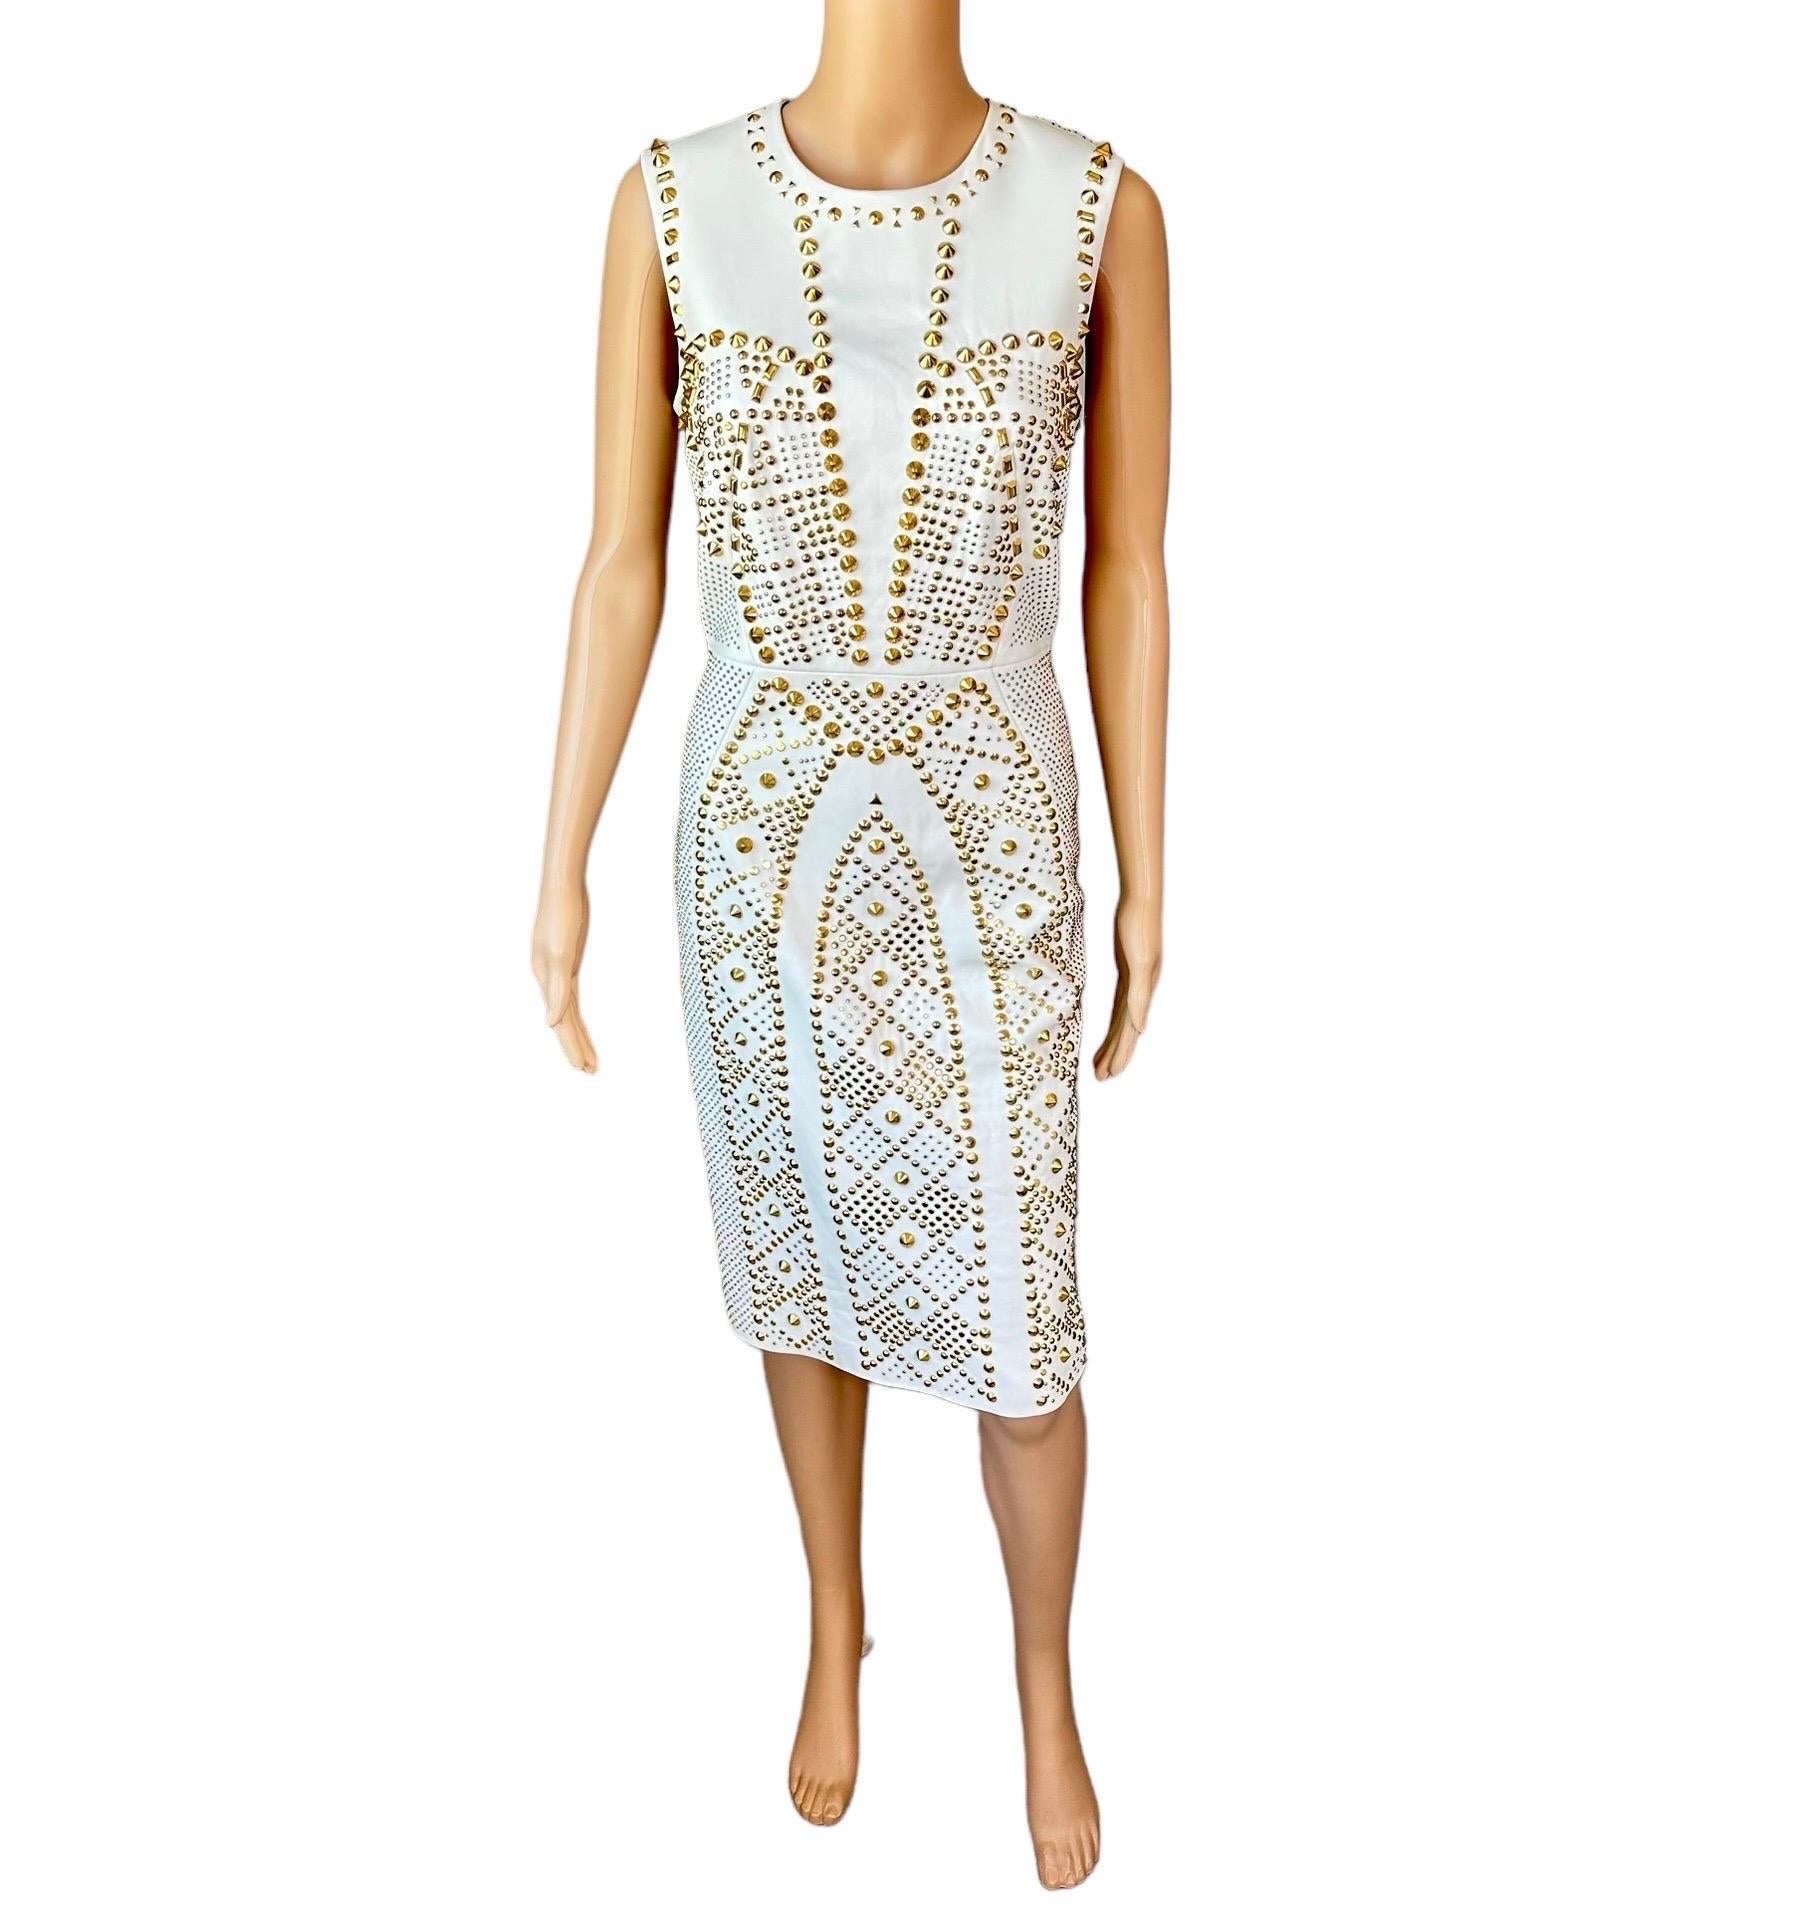 Versace S/S 2012 Runway Embellished Gold Studded Ivory Leather Dress  For Sale 6